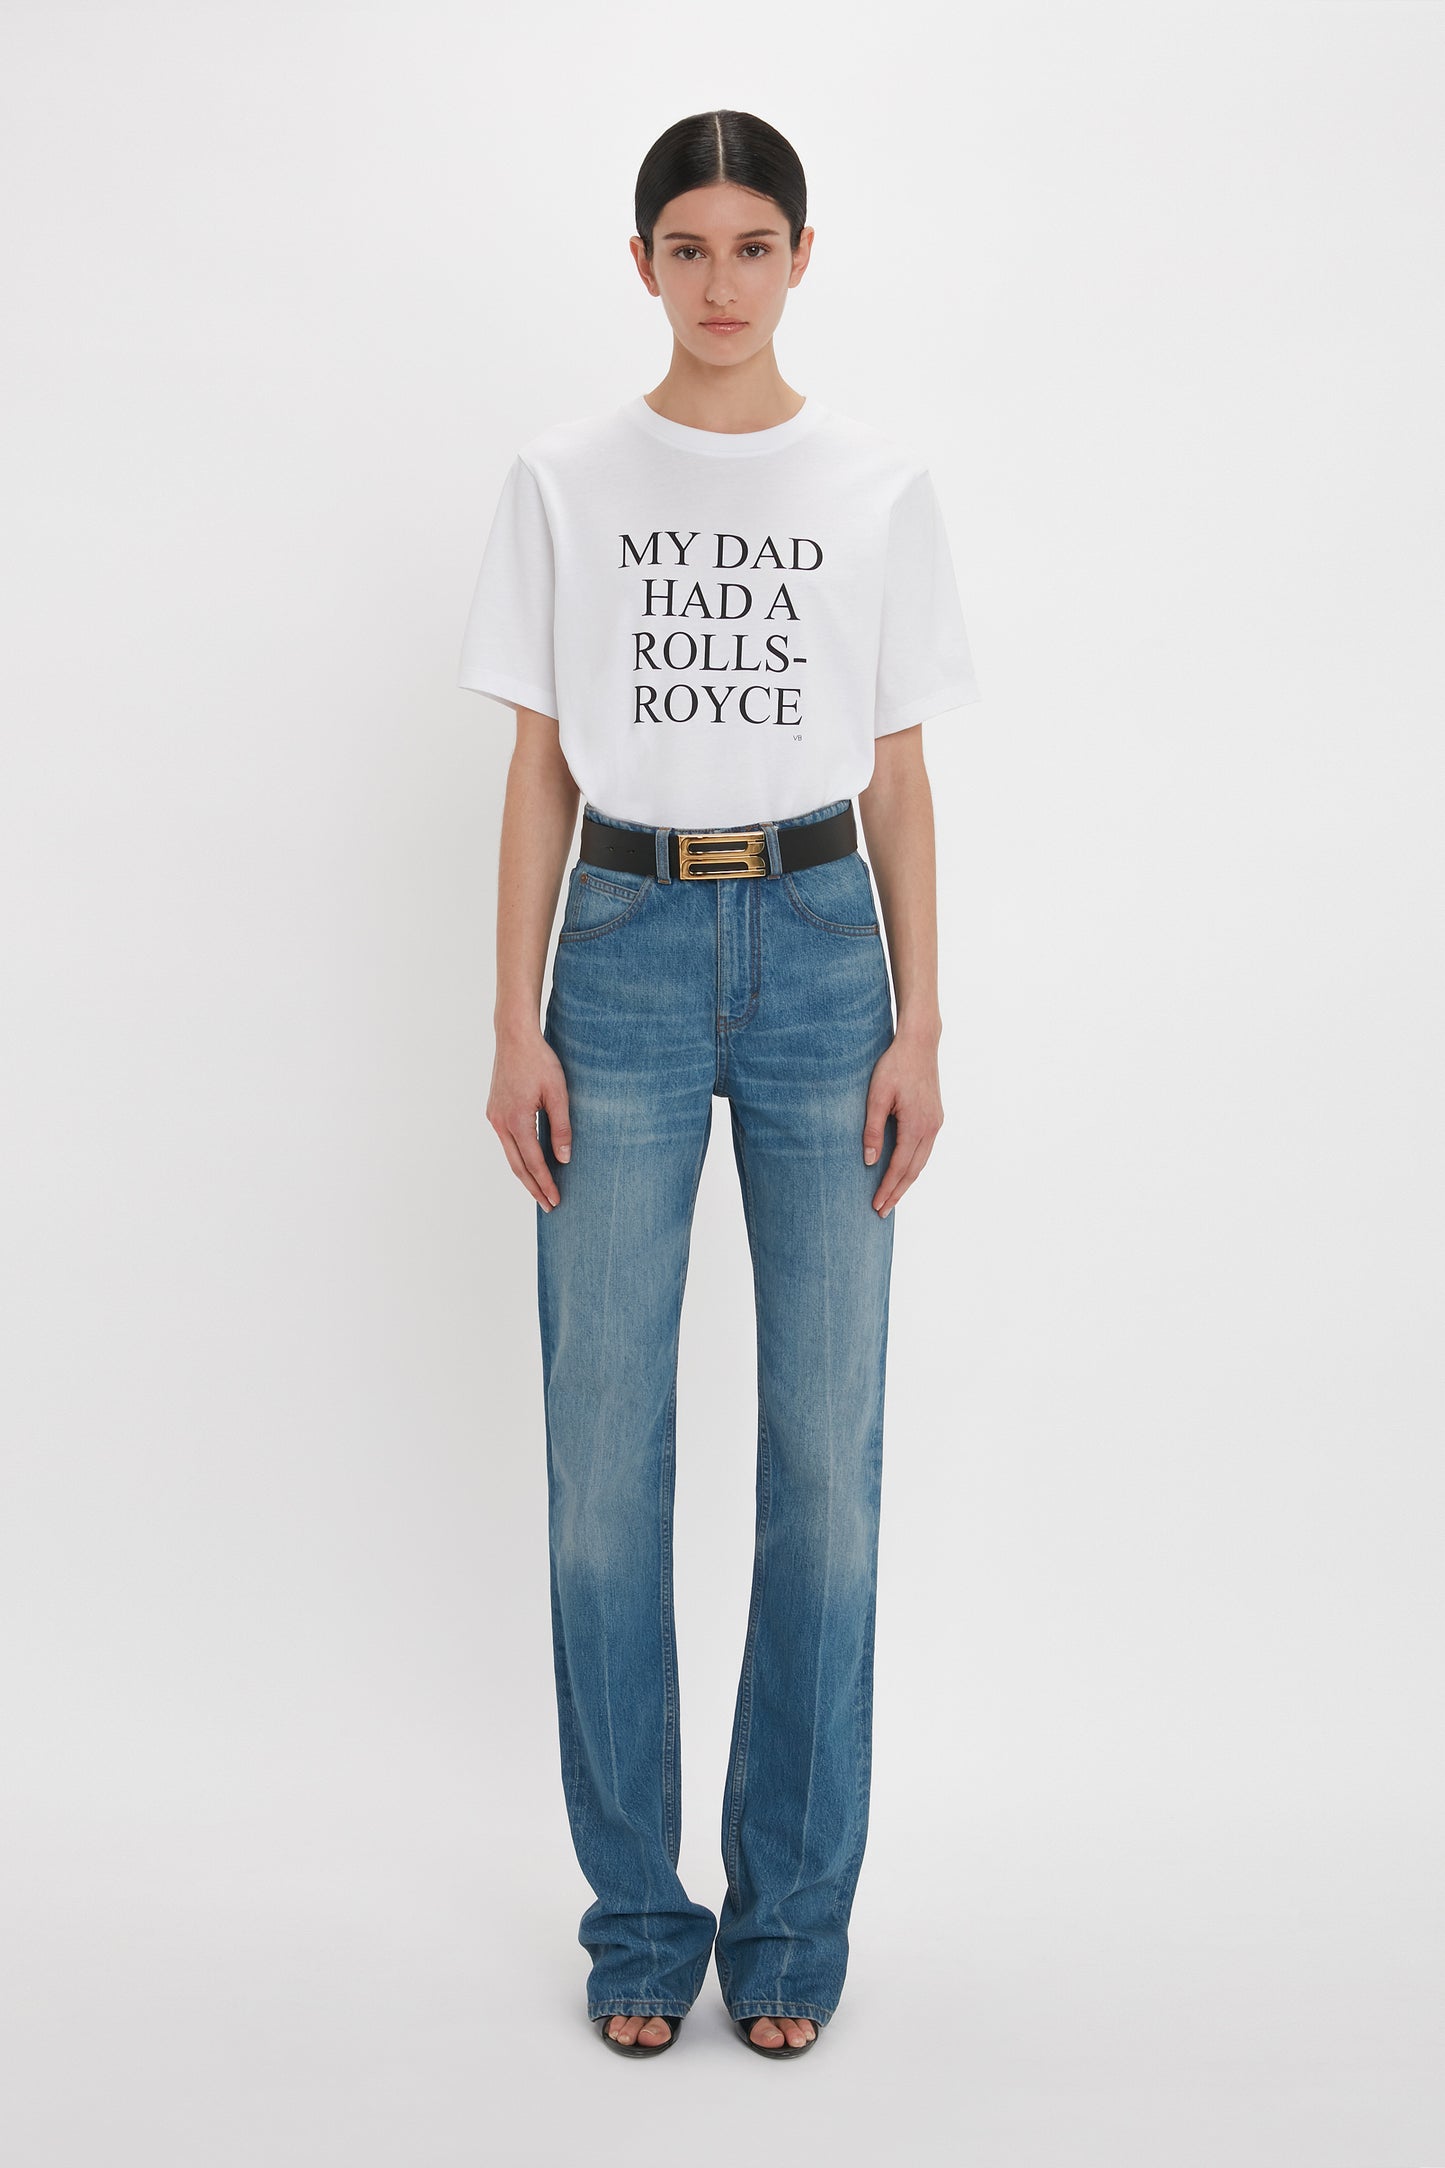 A person stands against a white background wearing a white T-shirt with the text "MY DAD HAD A ROLLS-ROYCE" and blue jeans crafted from distressed Broken Vintage Wash 100% cotton denim, specifically the Julia Jean In Broken Vintage Wash by Victoria Beckham.